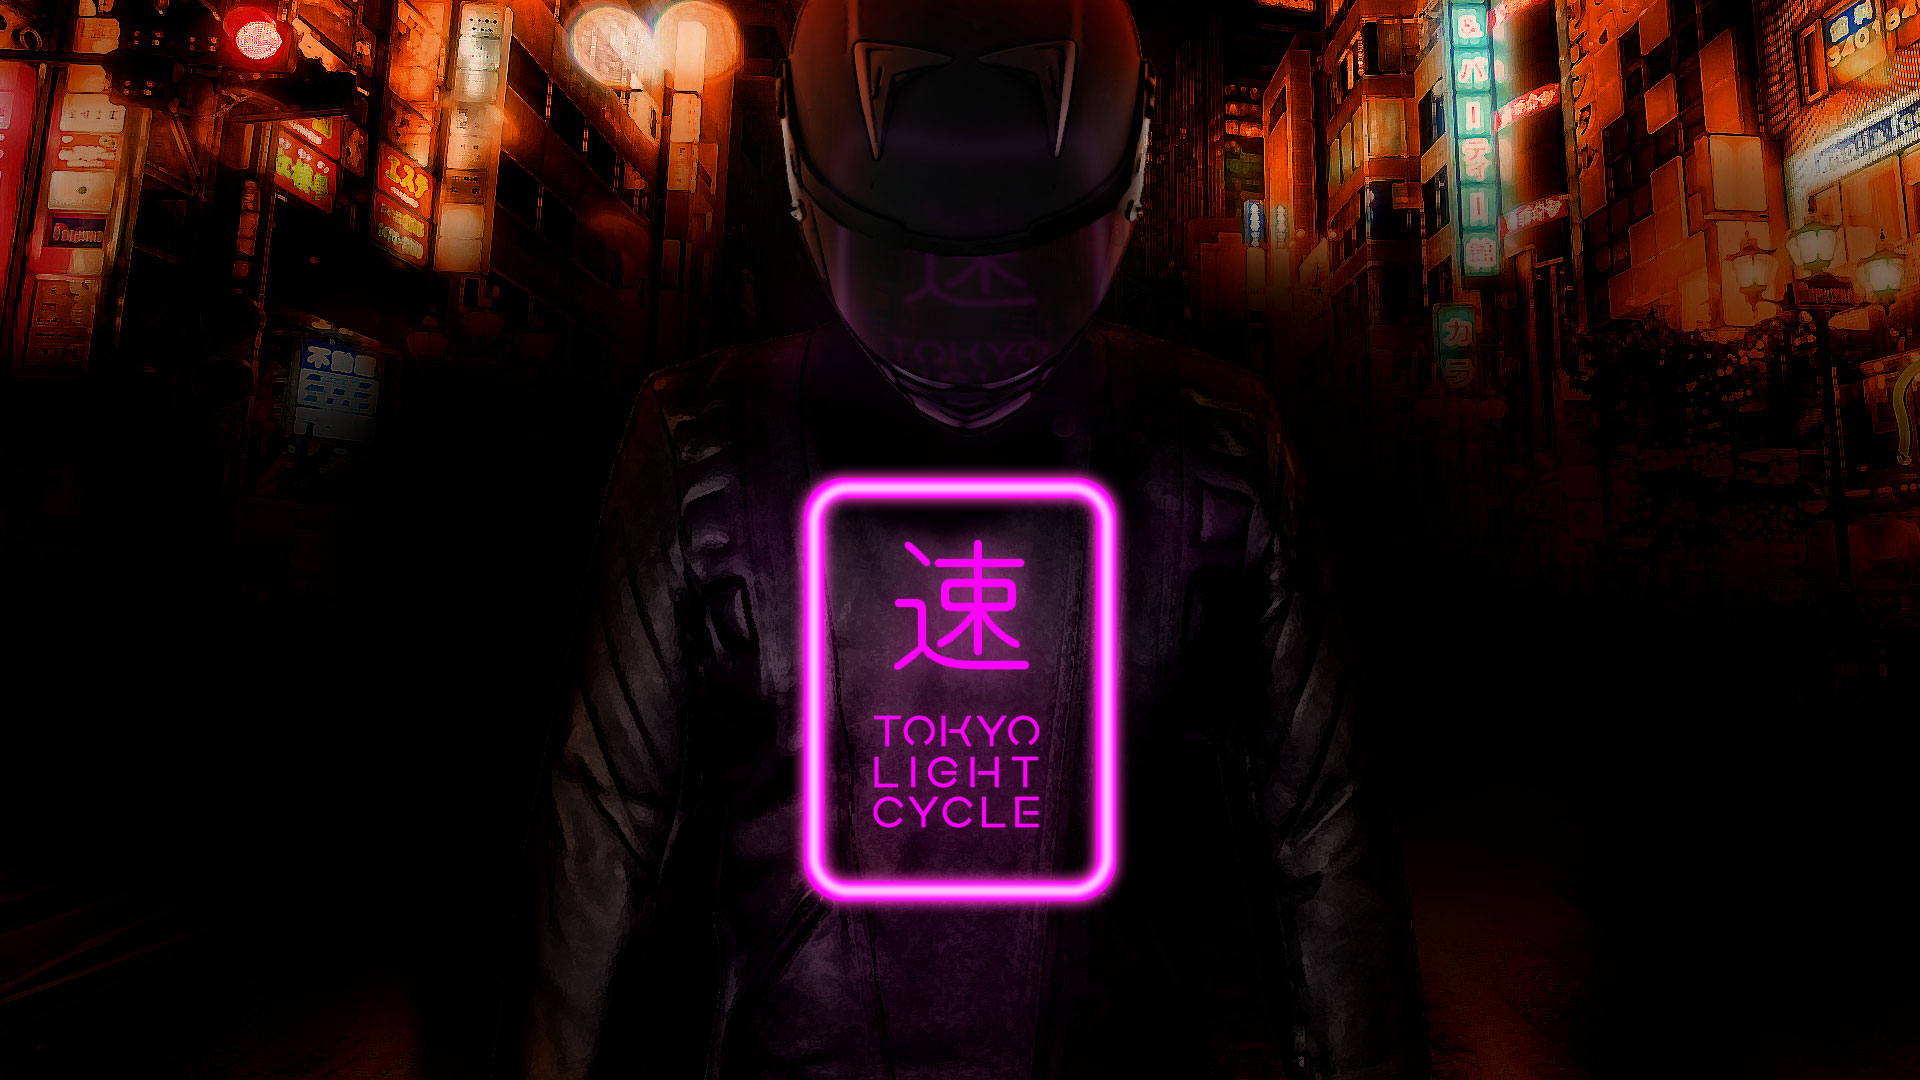 Teaser poster – Tokyo Light Cycle